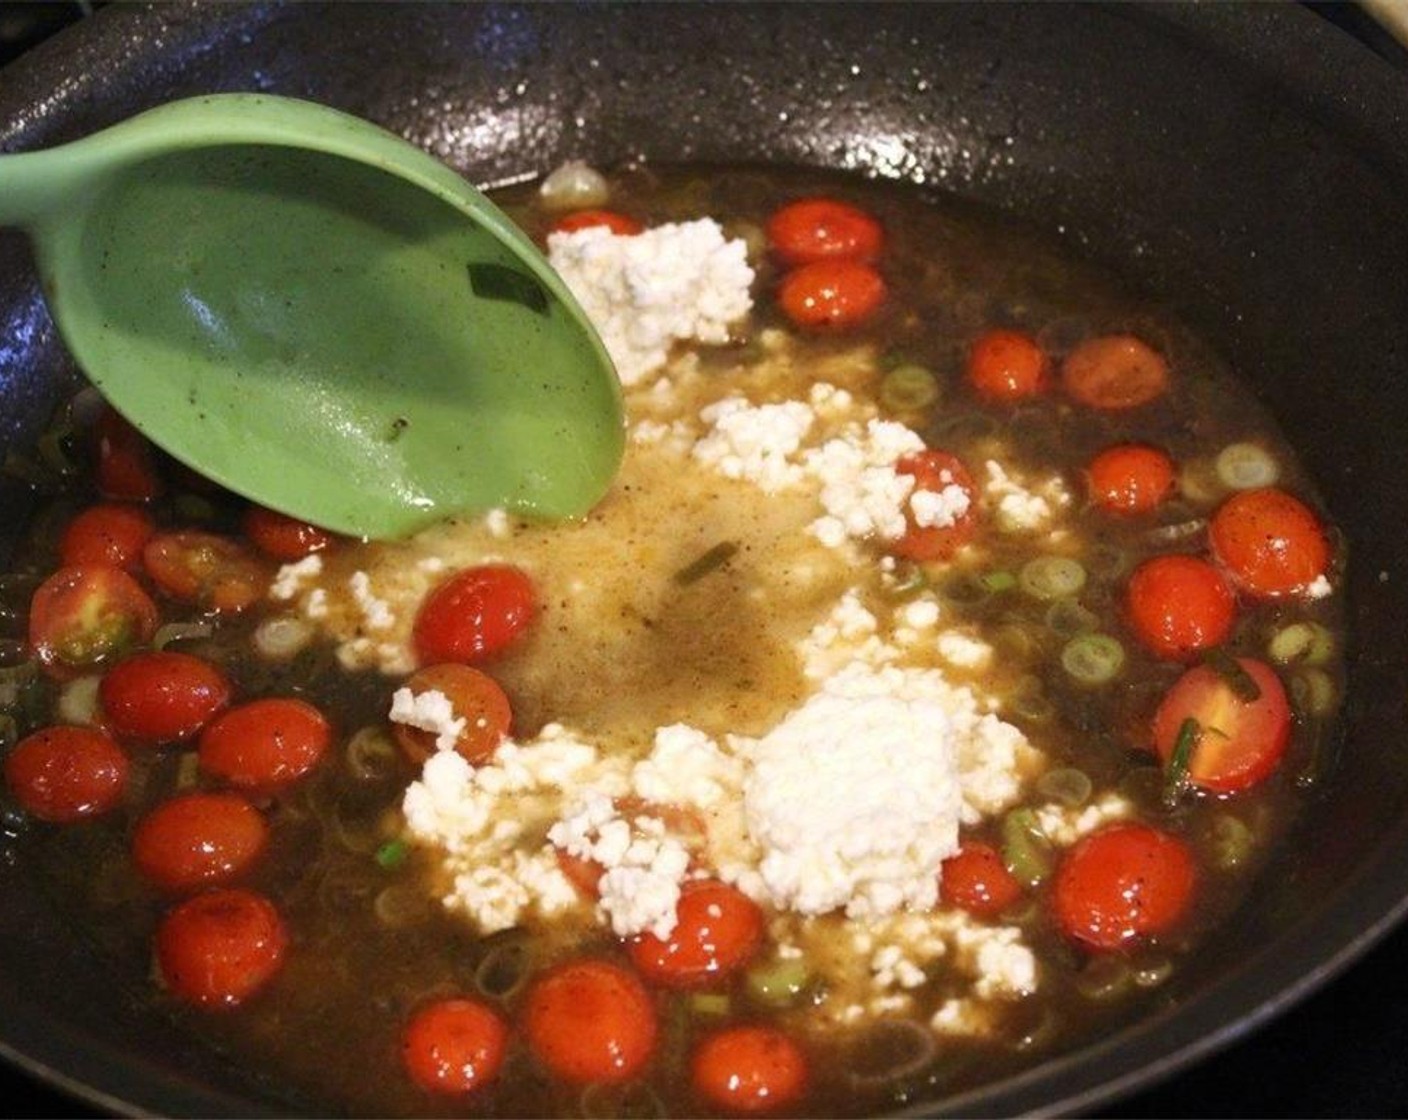 step 10 When the wine is reduced, stir in the Capers (1 Tbsp) and the Feta Cheese (1/2 cup). Stir the sauce for one more minute just to heat the feta but do not melt it.